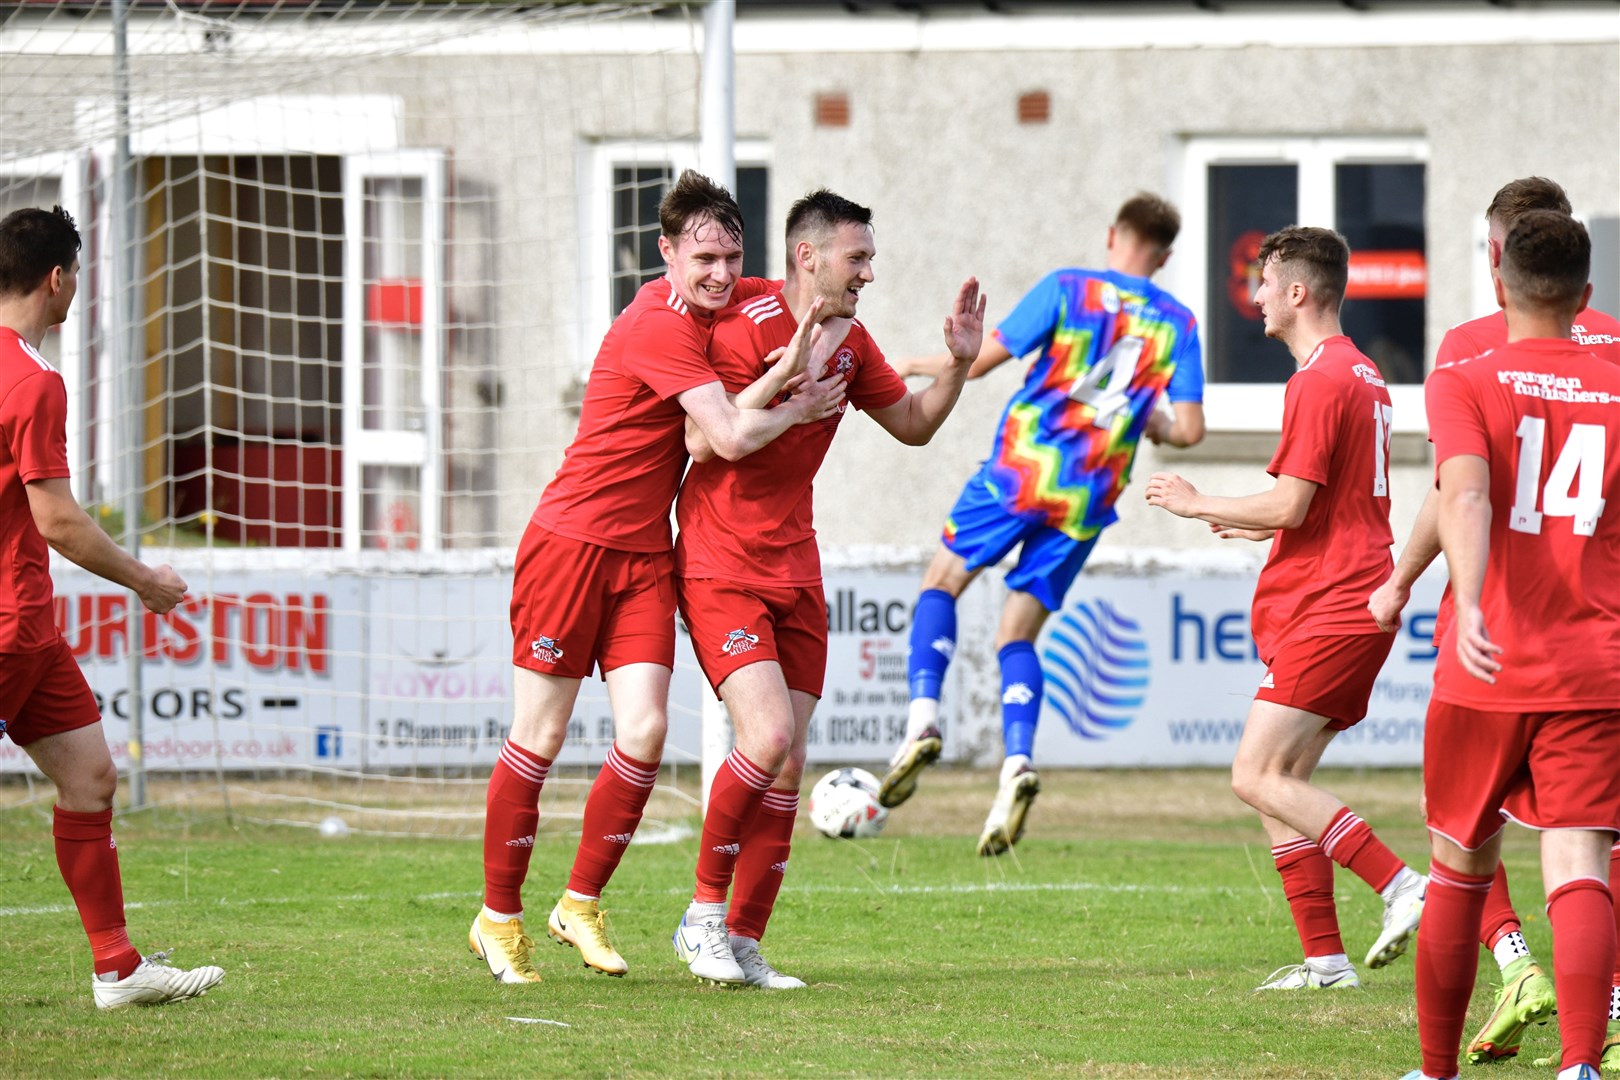 Dean Stewart is congrulated by his team mates after his goal. Picture: Daniel Forsyth